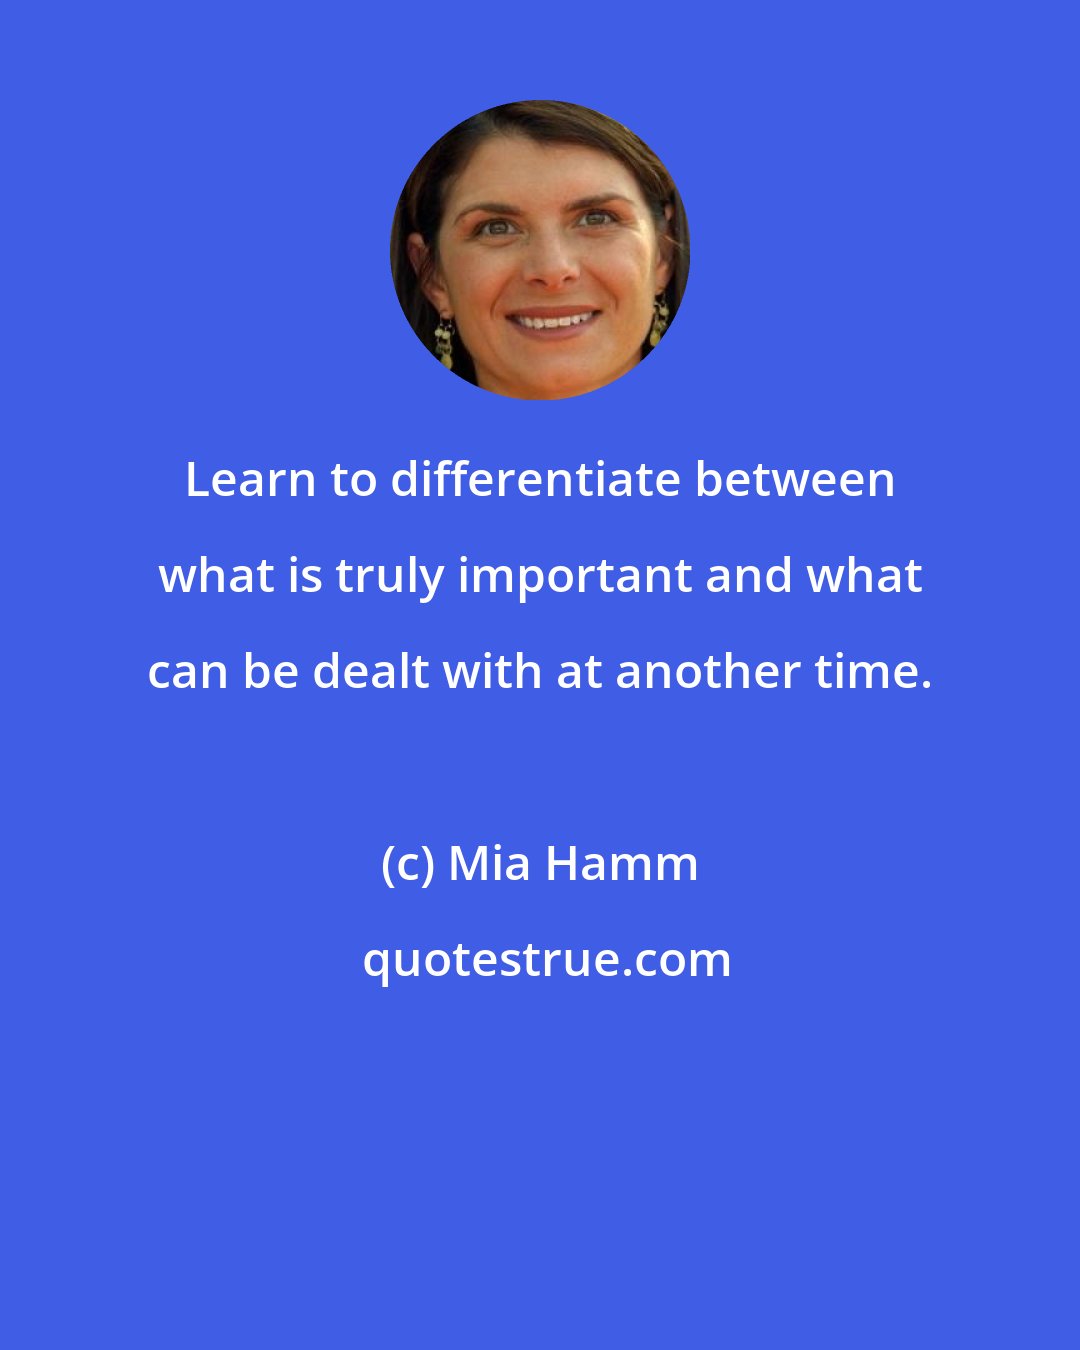 Mia Hamm: Learn to differentiate between what is truly important and what can be dealt with at another time.